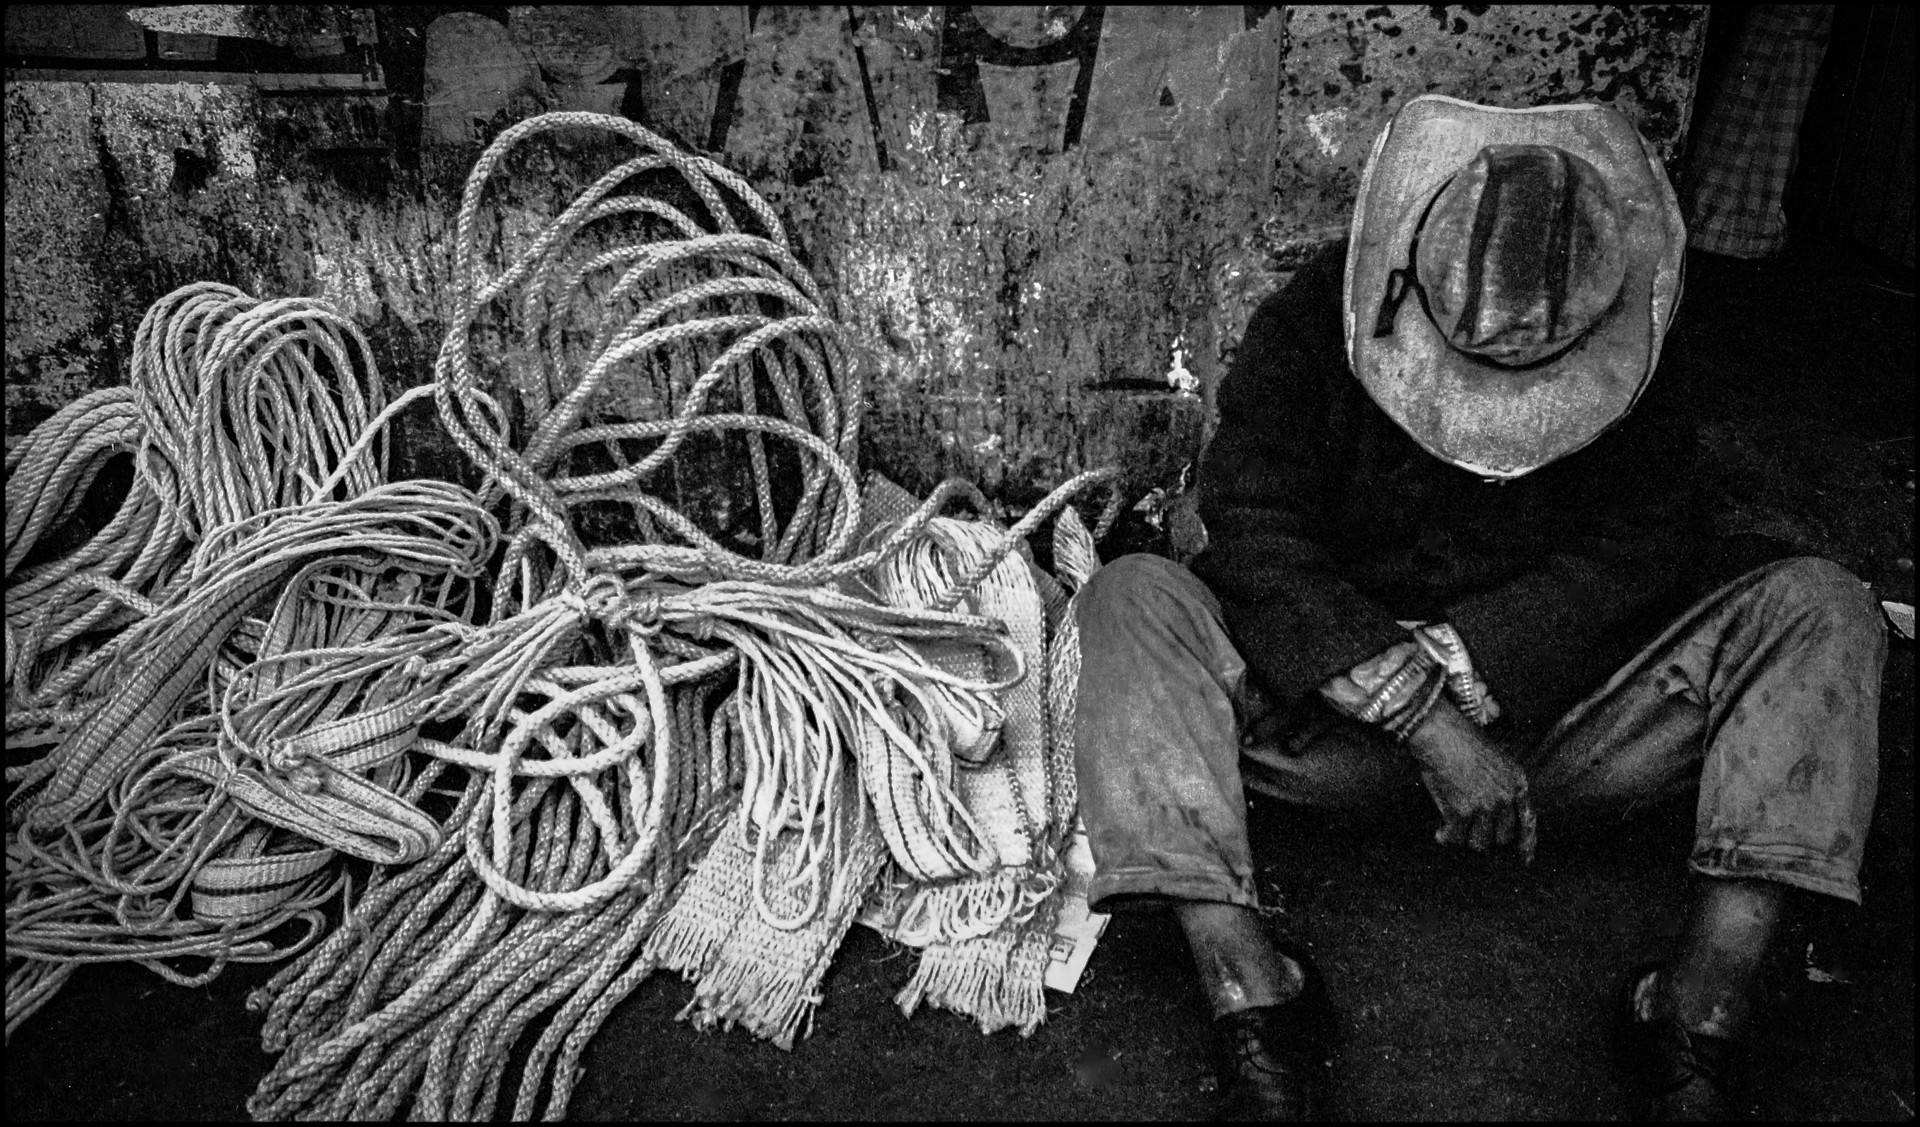 Sleeping Man with Rope, Mexico (open edition)(unframed) by James Hayman